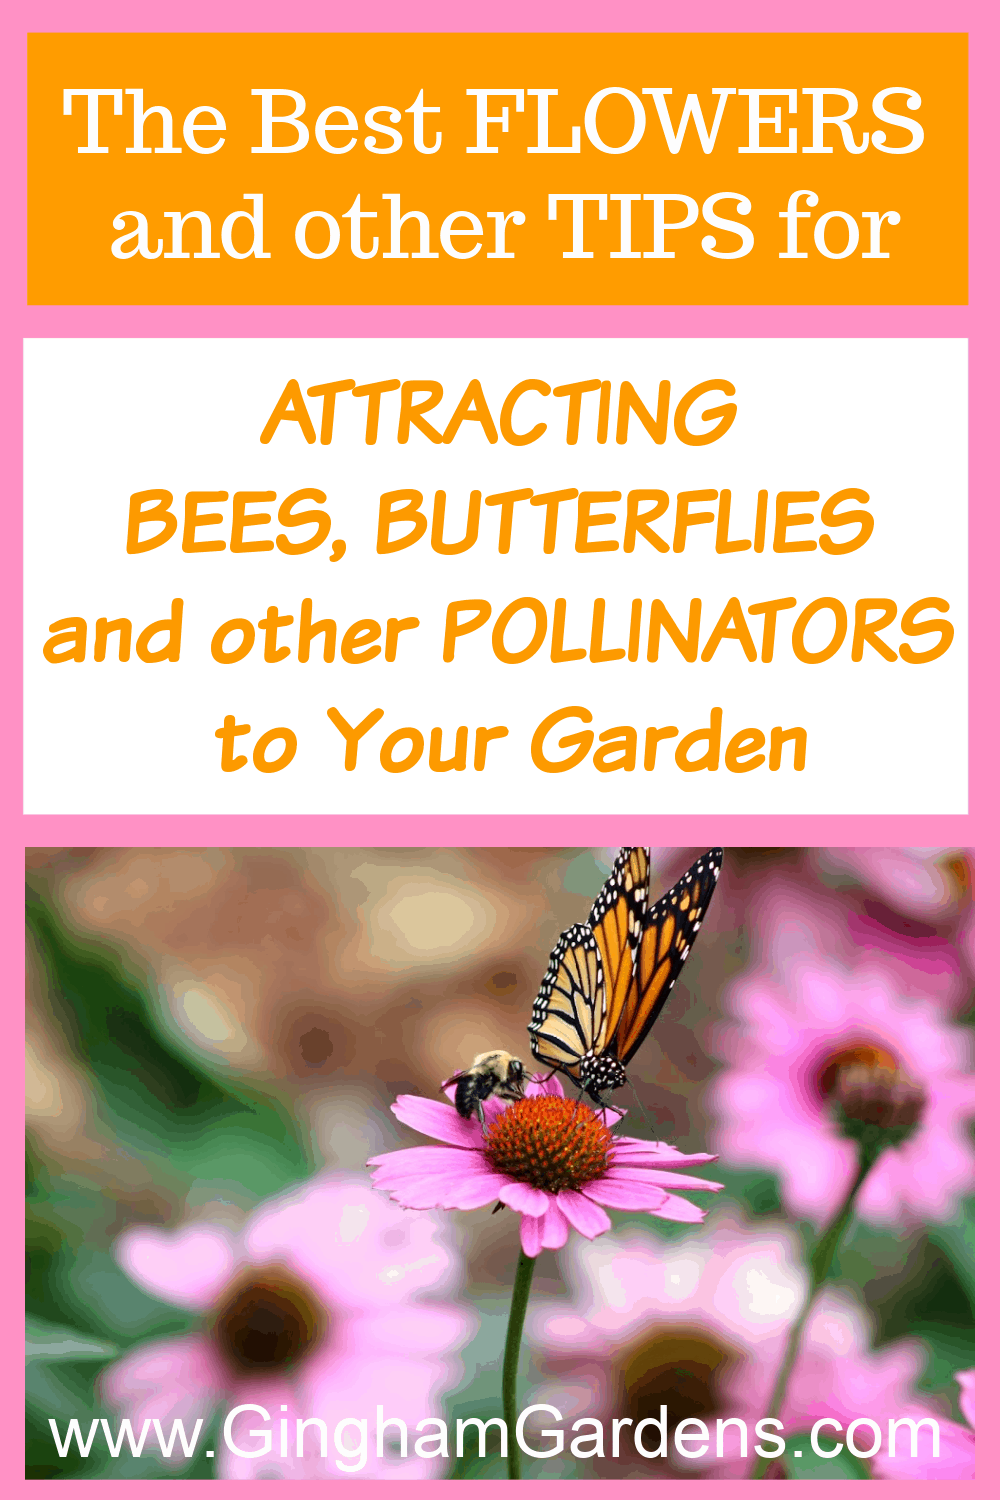 Image of a butterfly on a flower with text overlay - The Best Flowers and tips for attracting butterflies and other pollinators to your garden